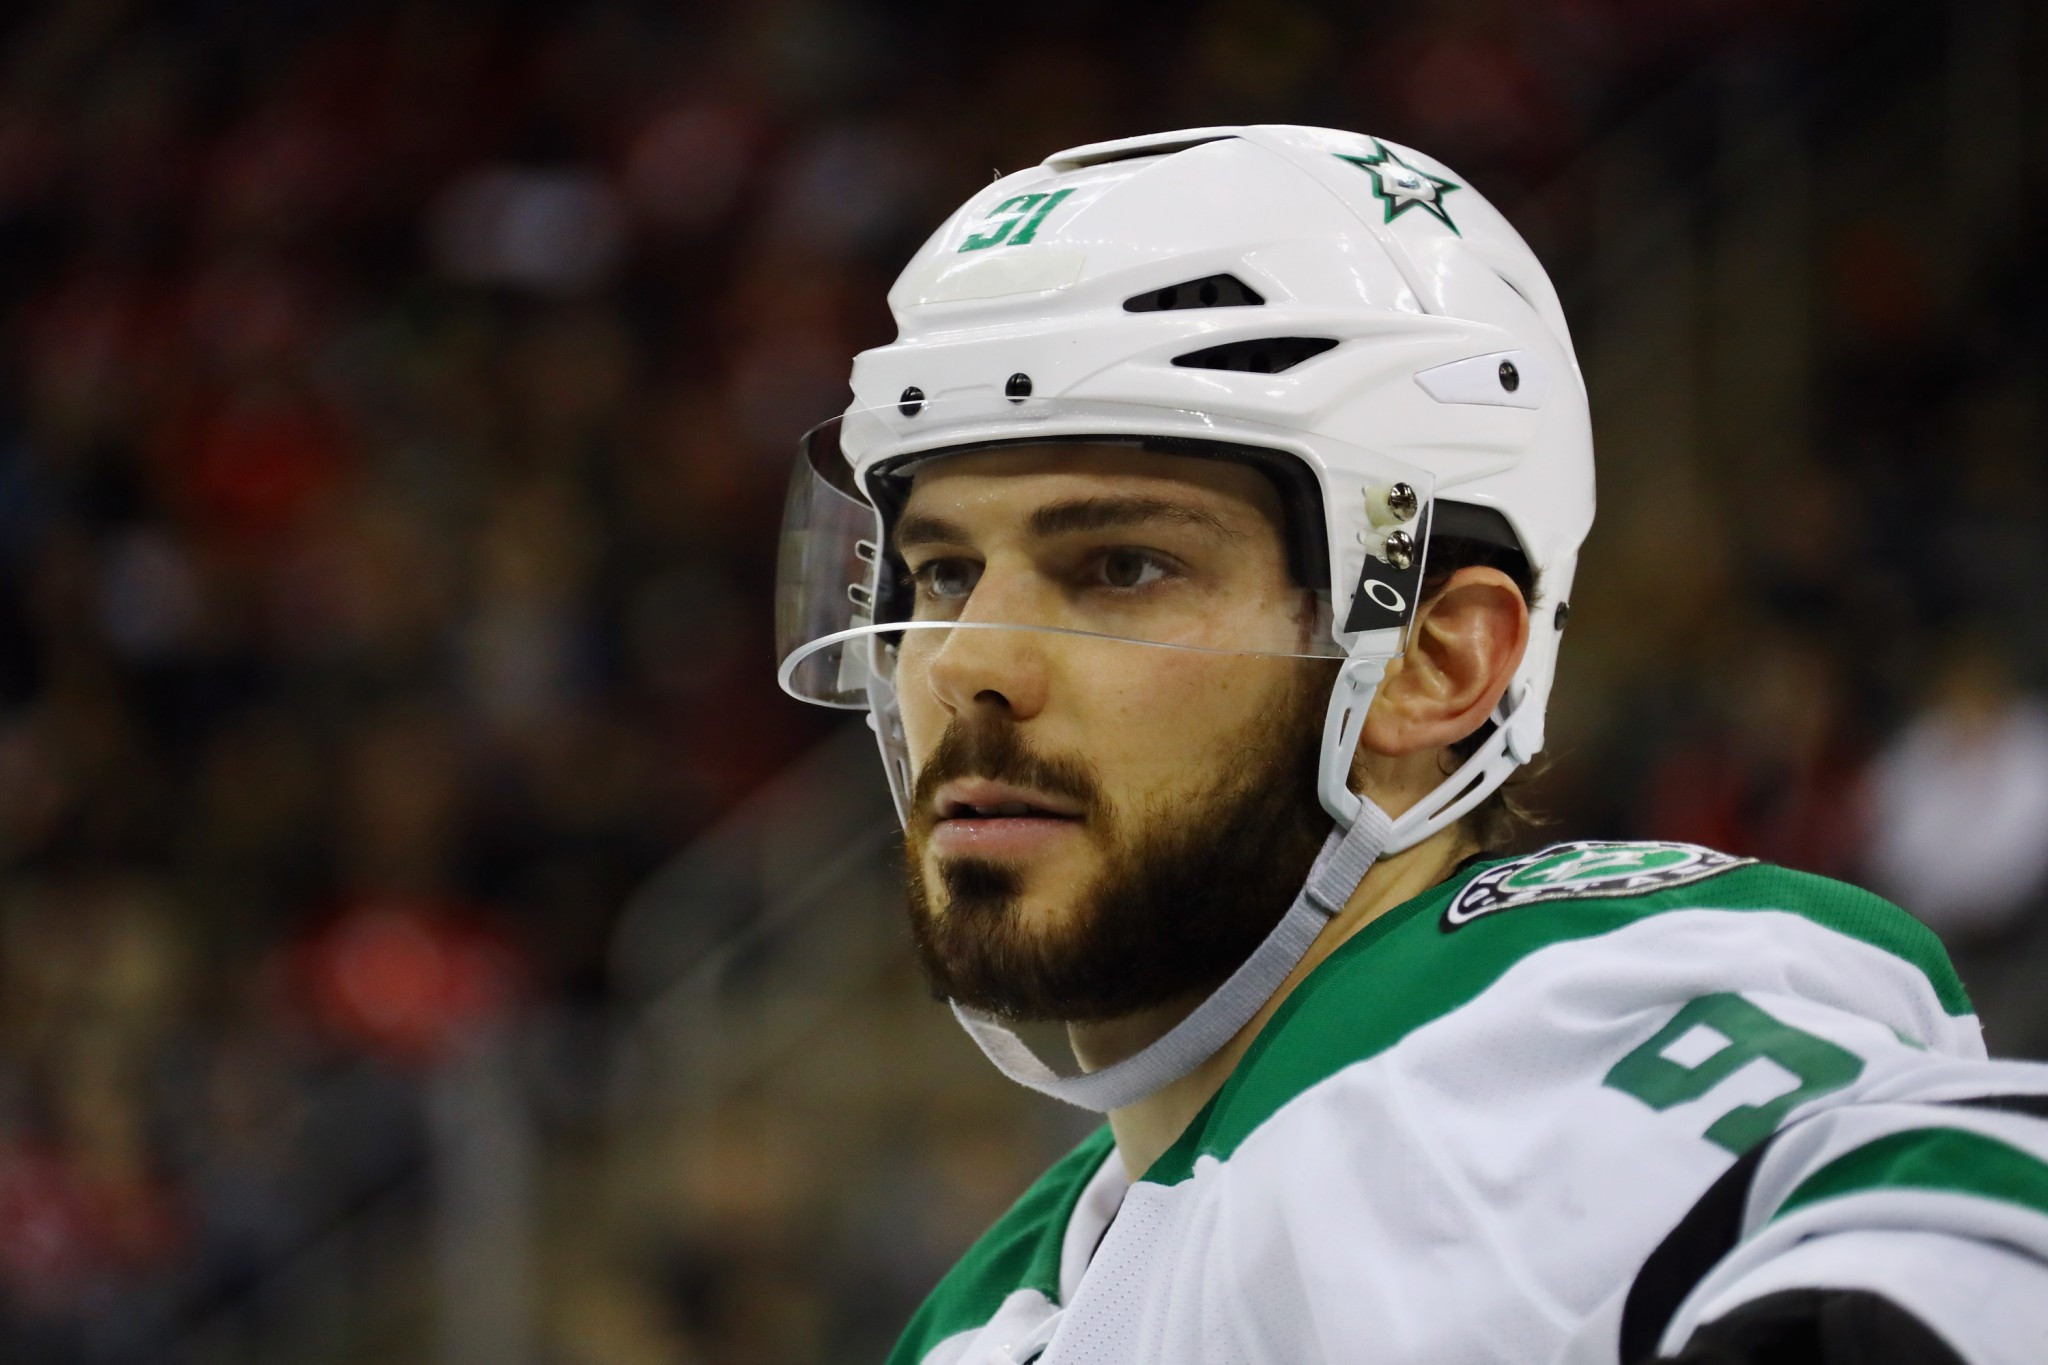 Tyler Seguin, of the Dallas Stars, says the NHL decision not to take part in the Pyeongchang 2018 Winter Games is "heartbreaking" ©Getty Images